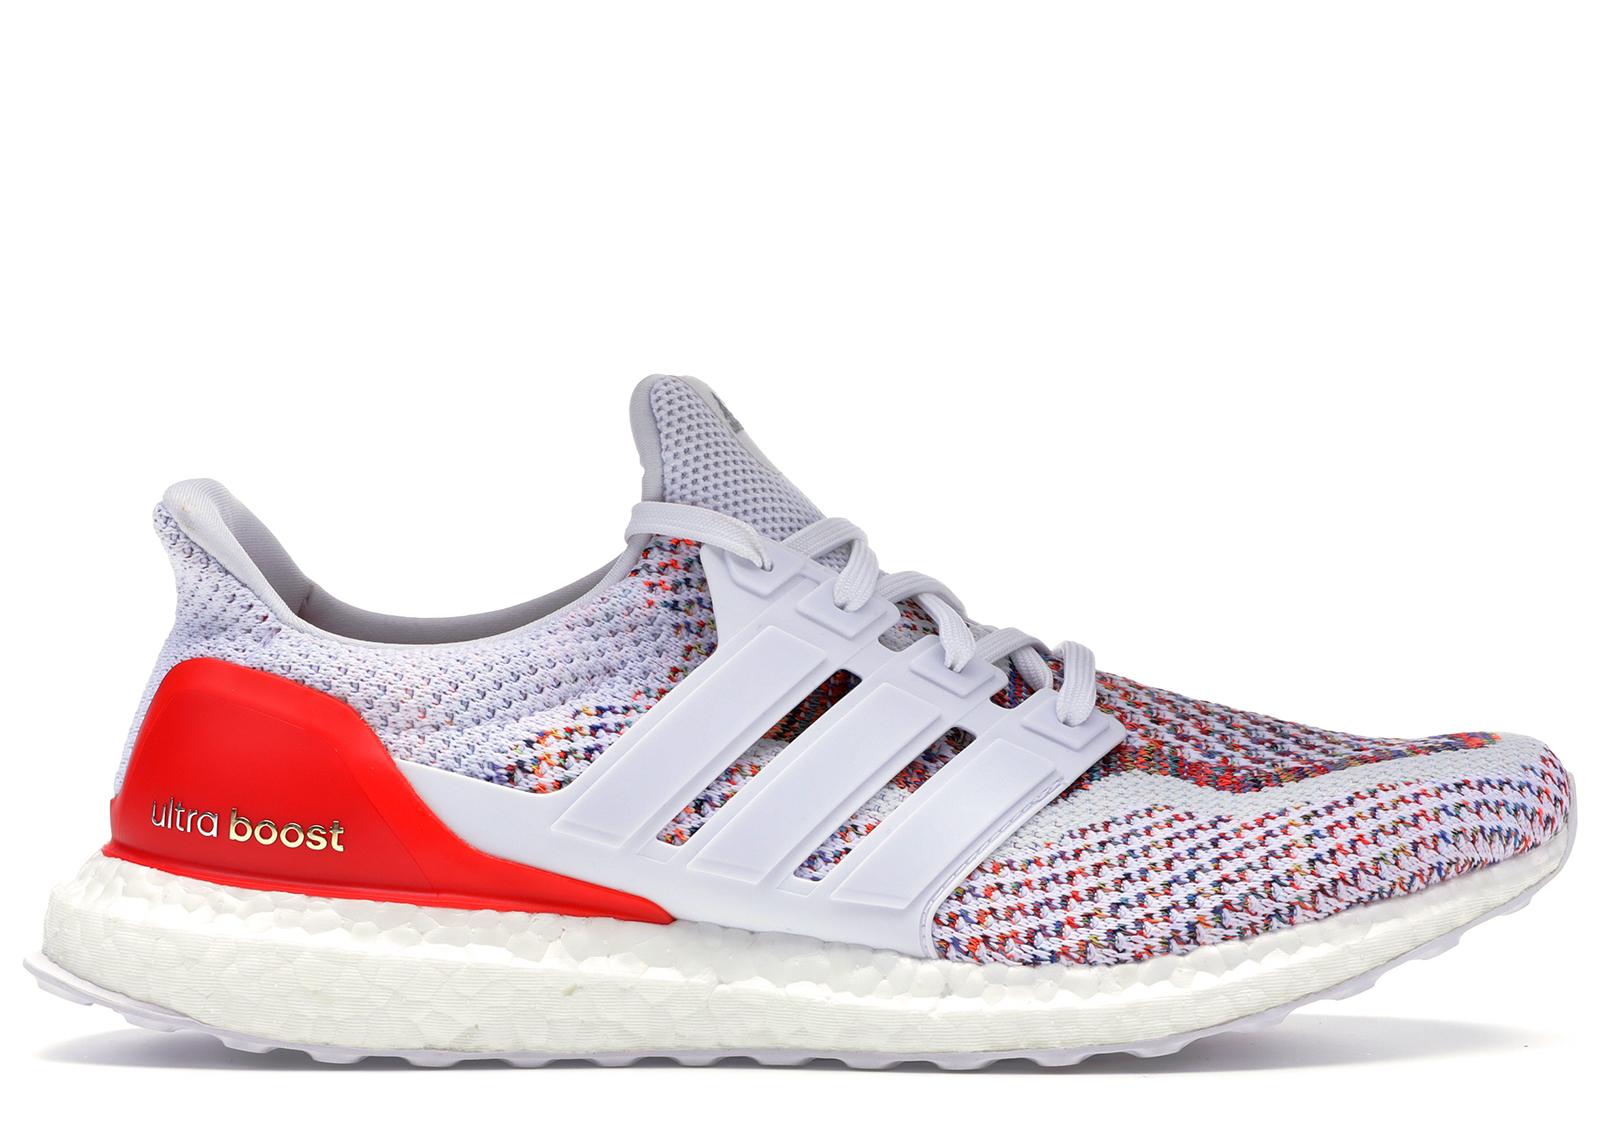 adidas Ultra Boost 2.0 Multi-color in White for Men - Lyst